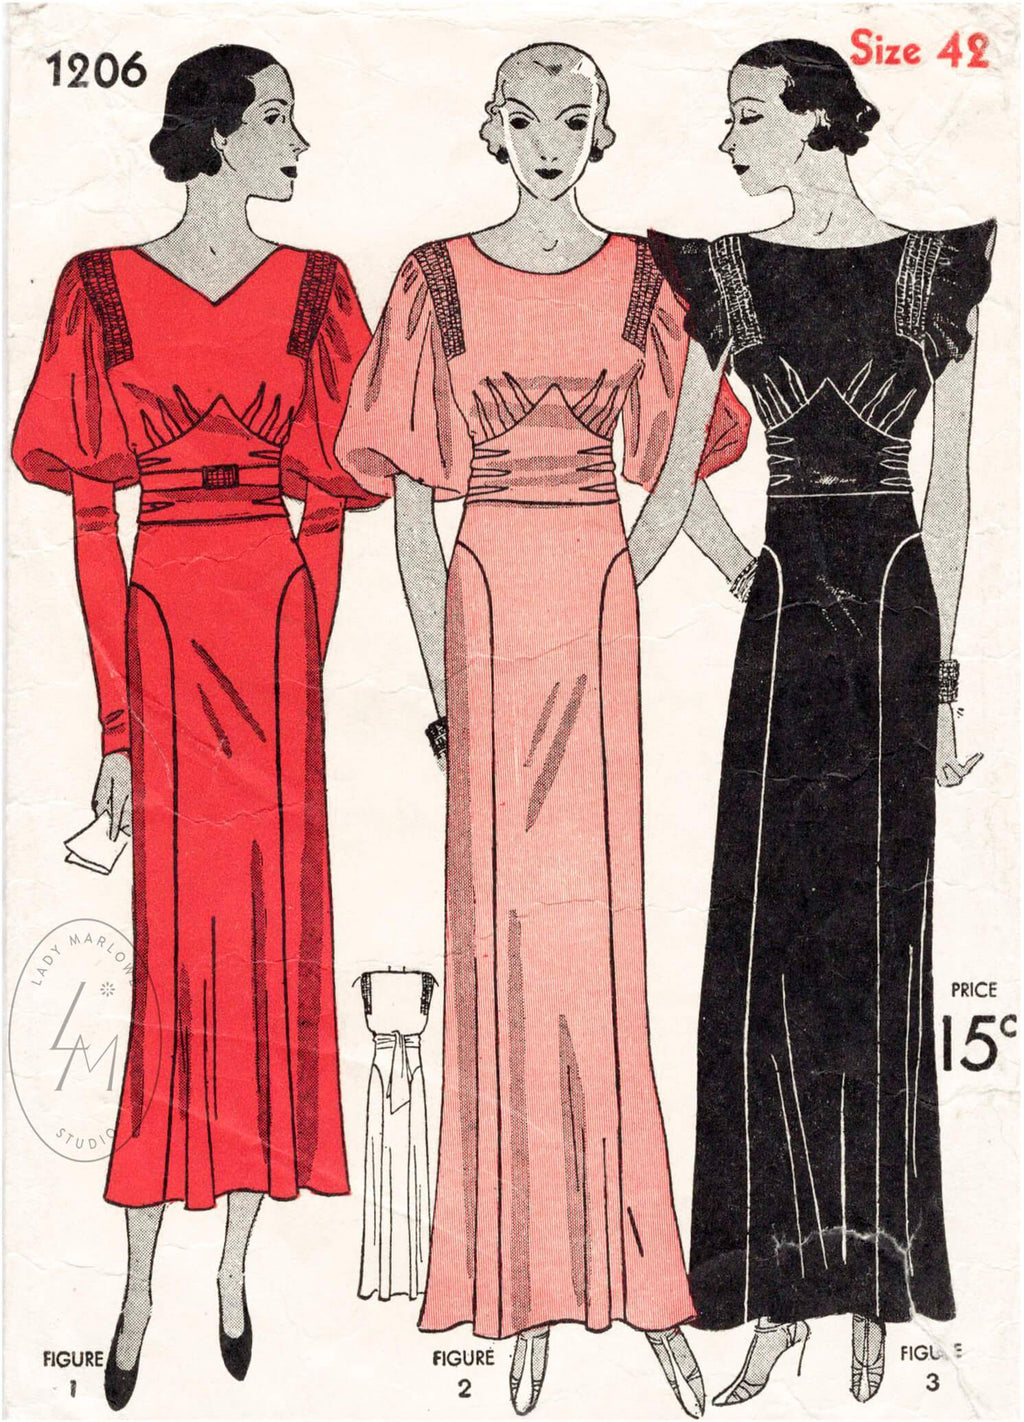 Vintage Sewing Pattern Template & Scale Rulers 1930s Evening Gown in Any  Size PLUS Size Included 1215 INSTANT DOWNLOAD - Etsy | Evening gown pattern,  Gown pattern, Vintage evening gowns